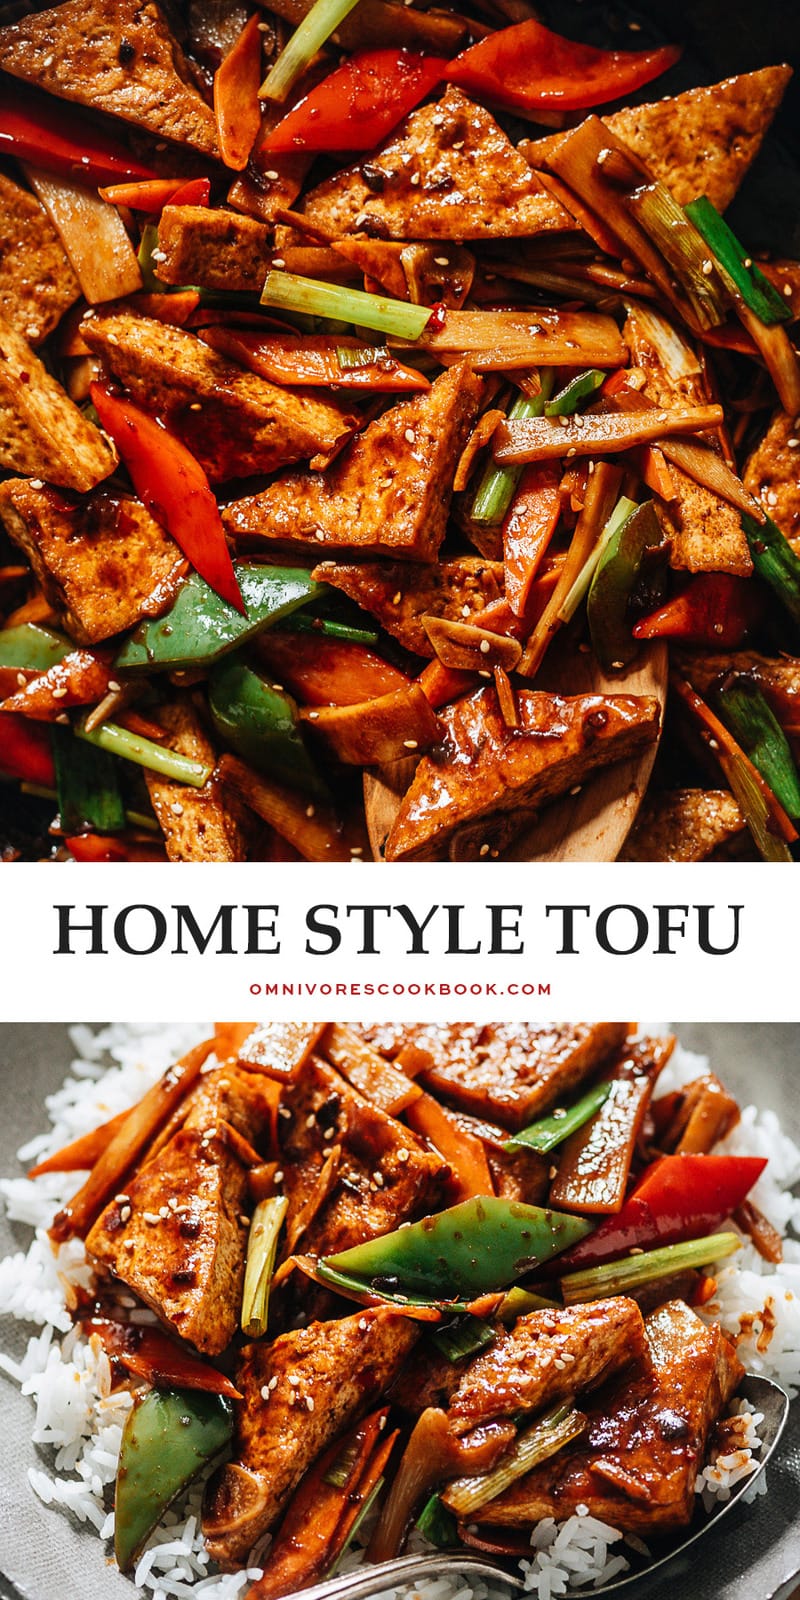 If you aren’t a tofu lover already, you will be after you try this home style tofu. It has a tender texture and crispy crust along with a savory, lightly spicy sauce and crunchy veggies. {Vegan}